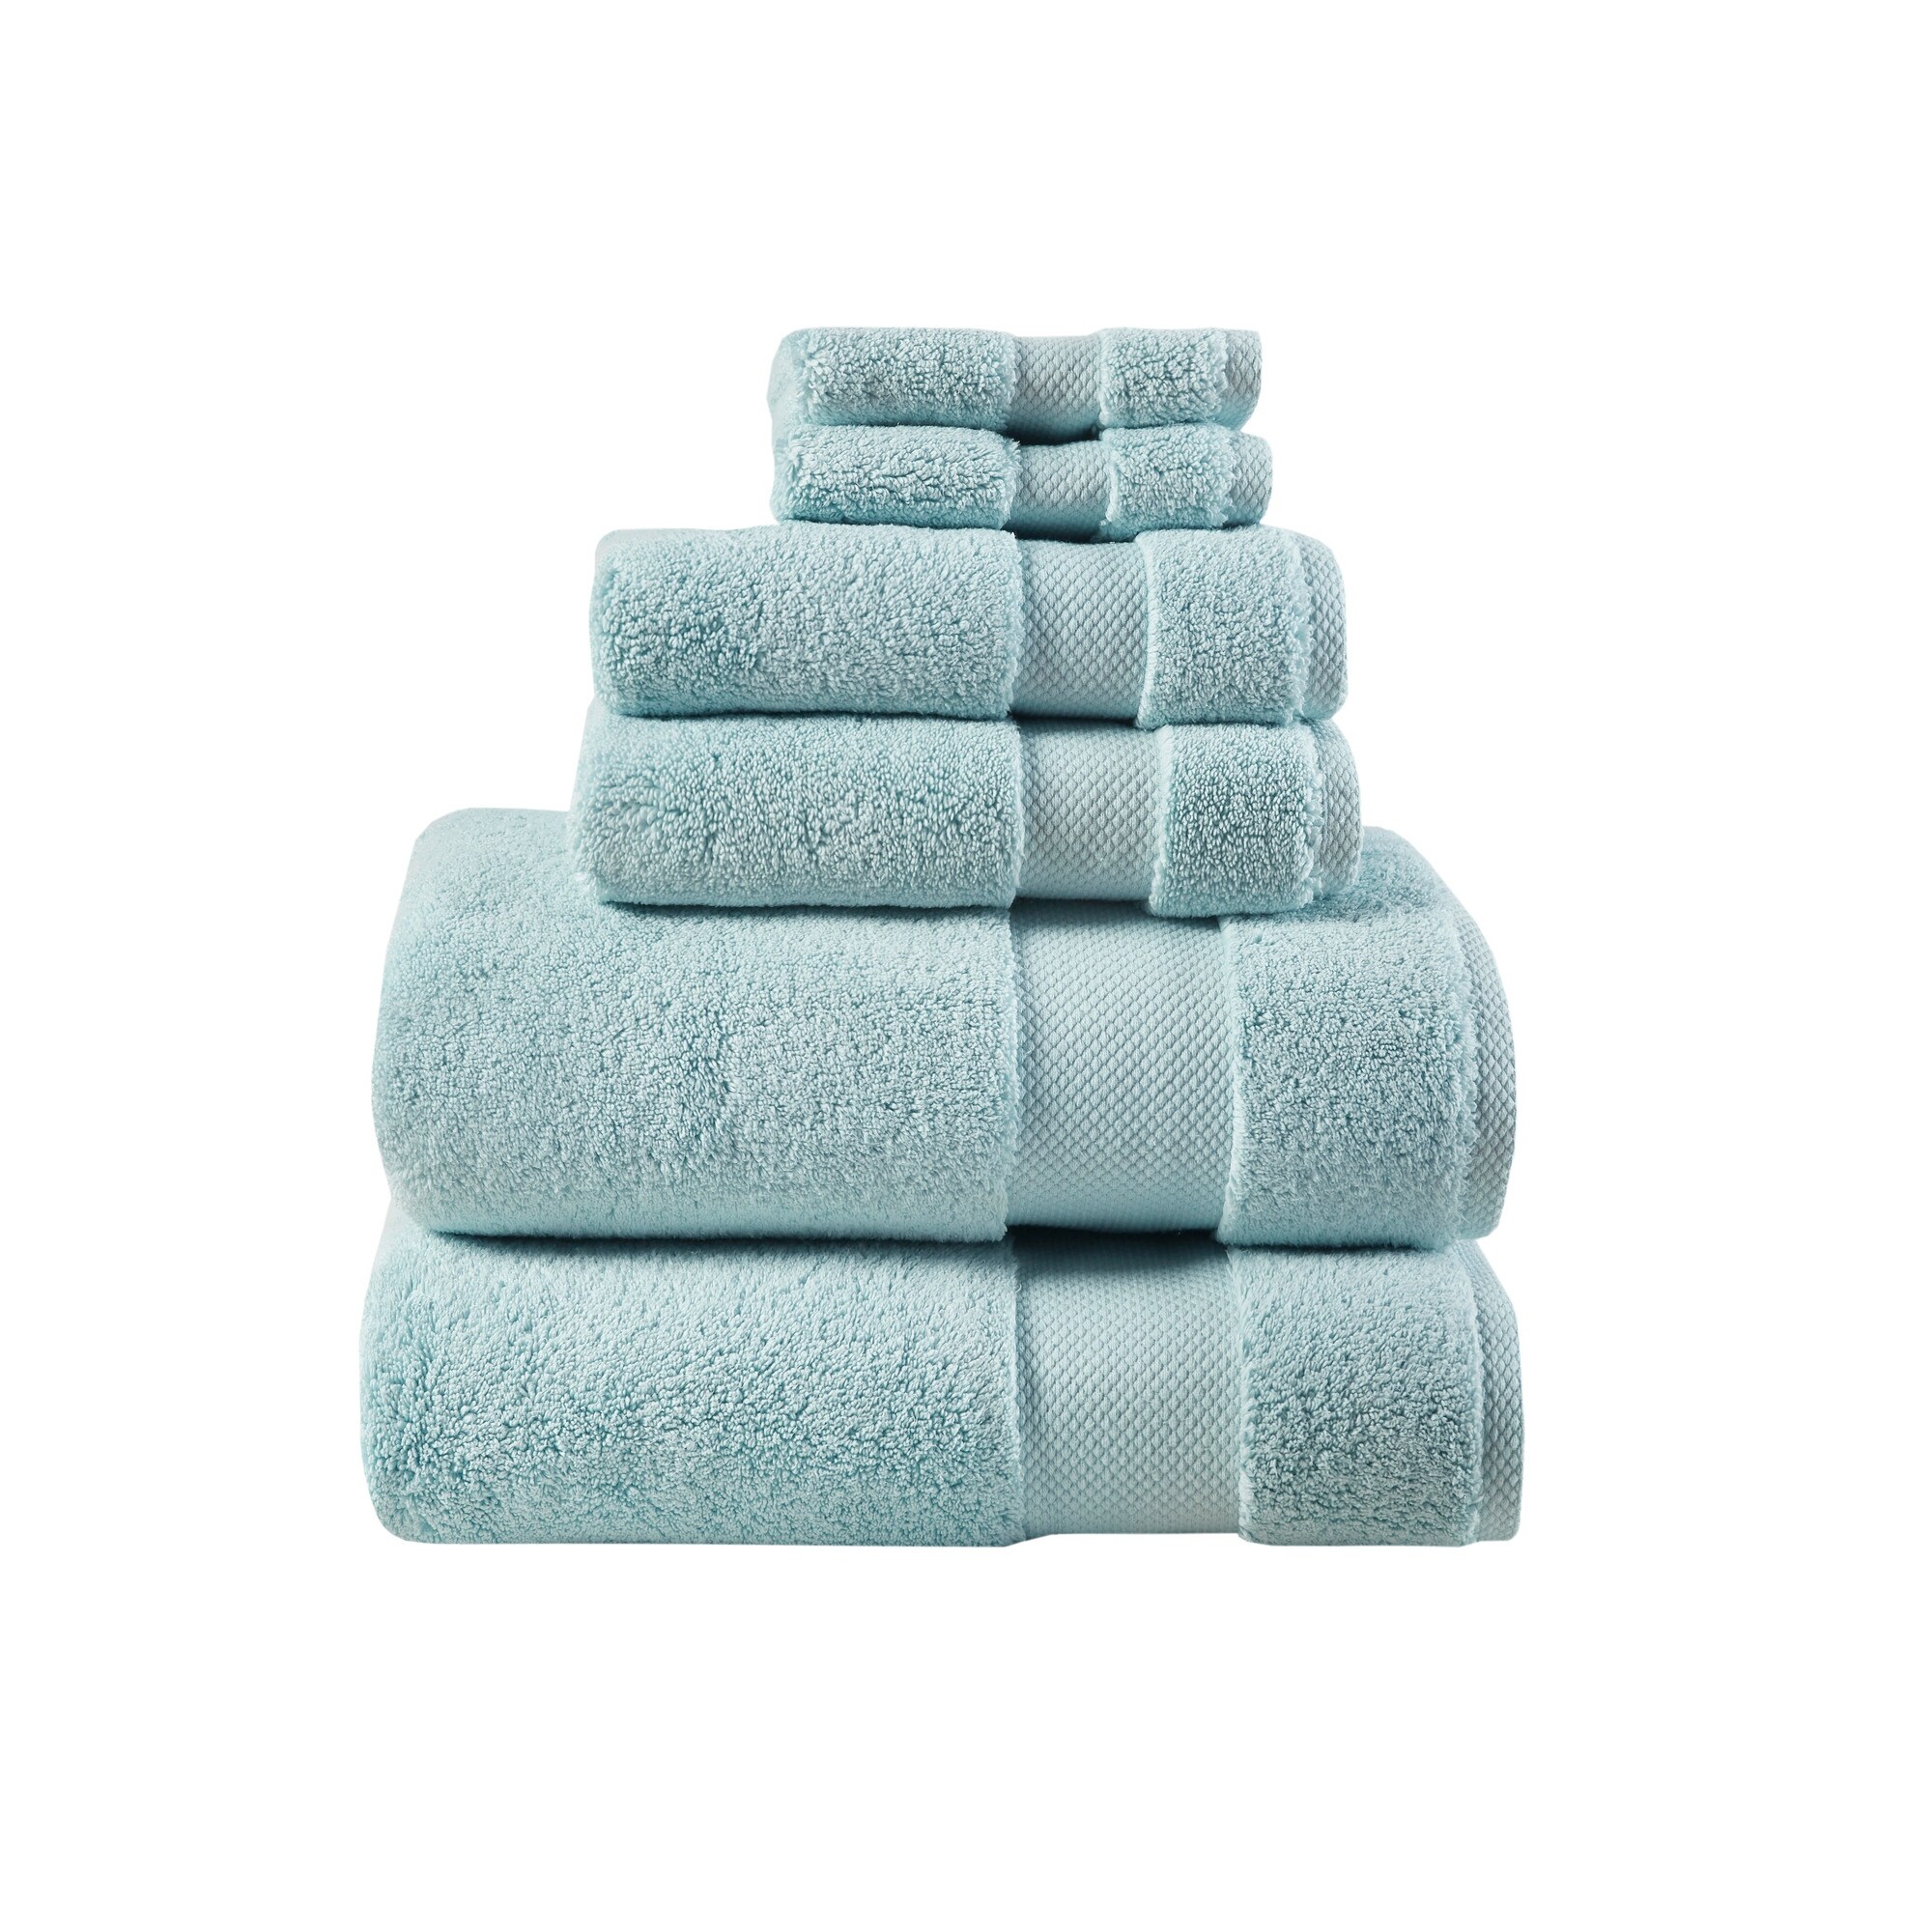 TBYOYi 4 Colors Microfiber Towel Set | Super Soft and Absorbent Quick-Dry Lightweight 4 Bath Towels 4 Hand Towels for Shower Pool Beach Bathroom